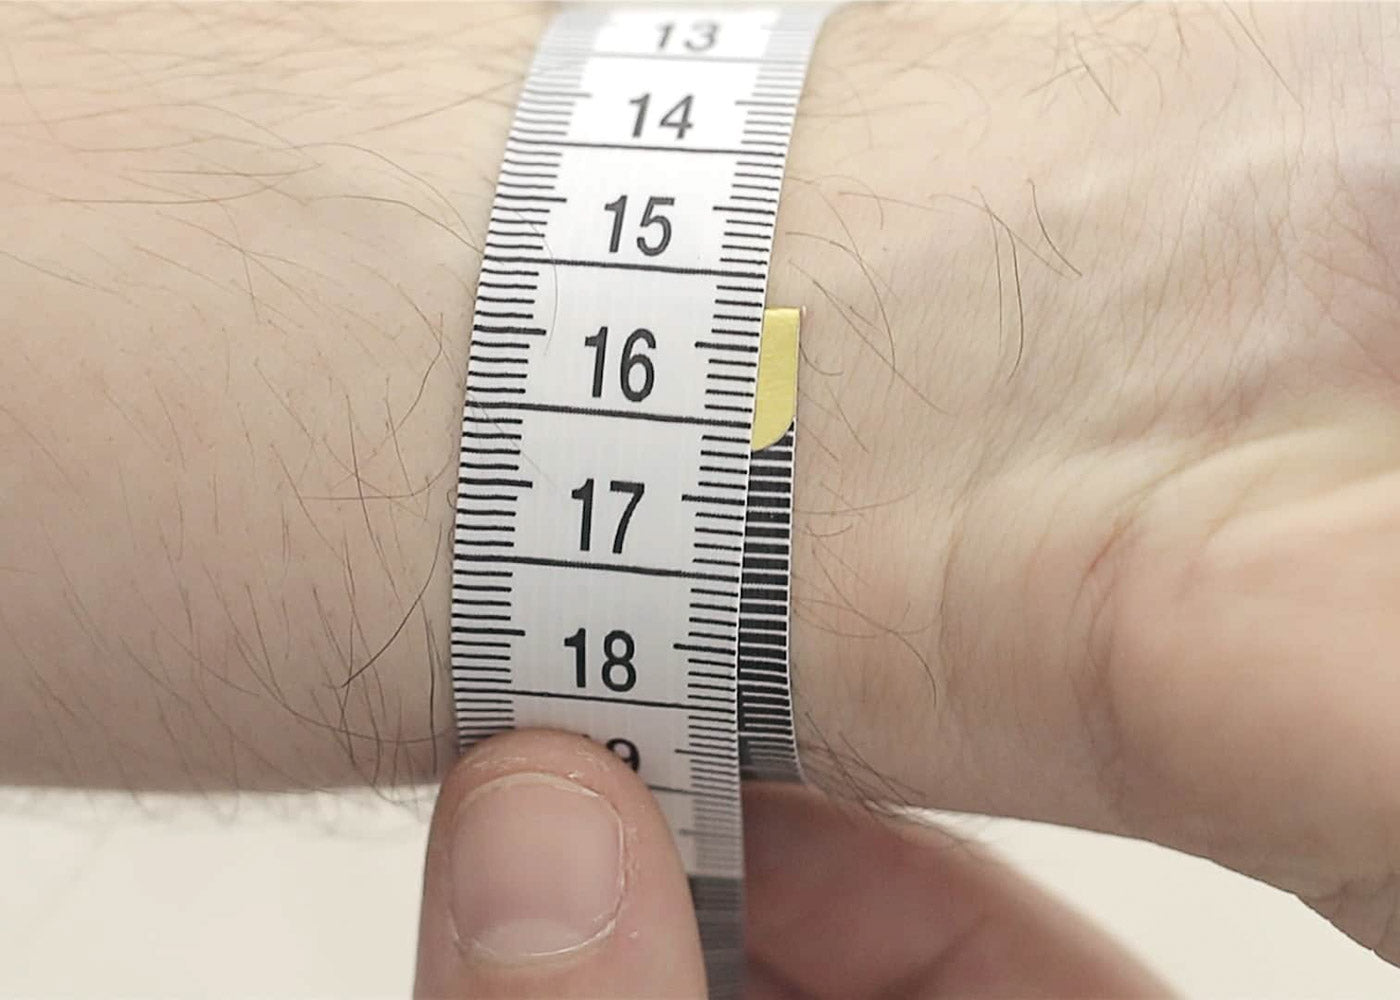 How to measure wrist size for apple watch